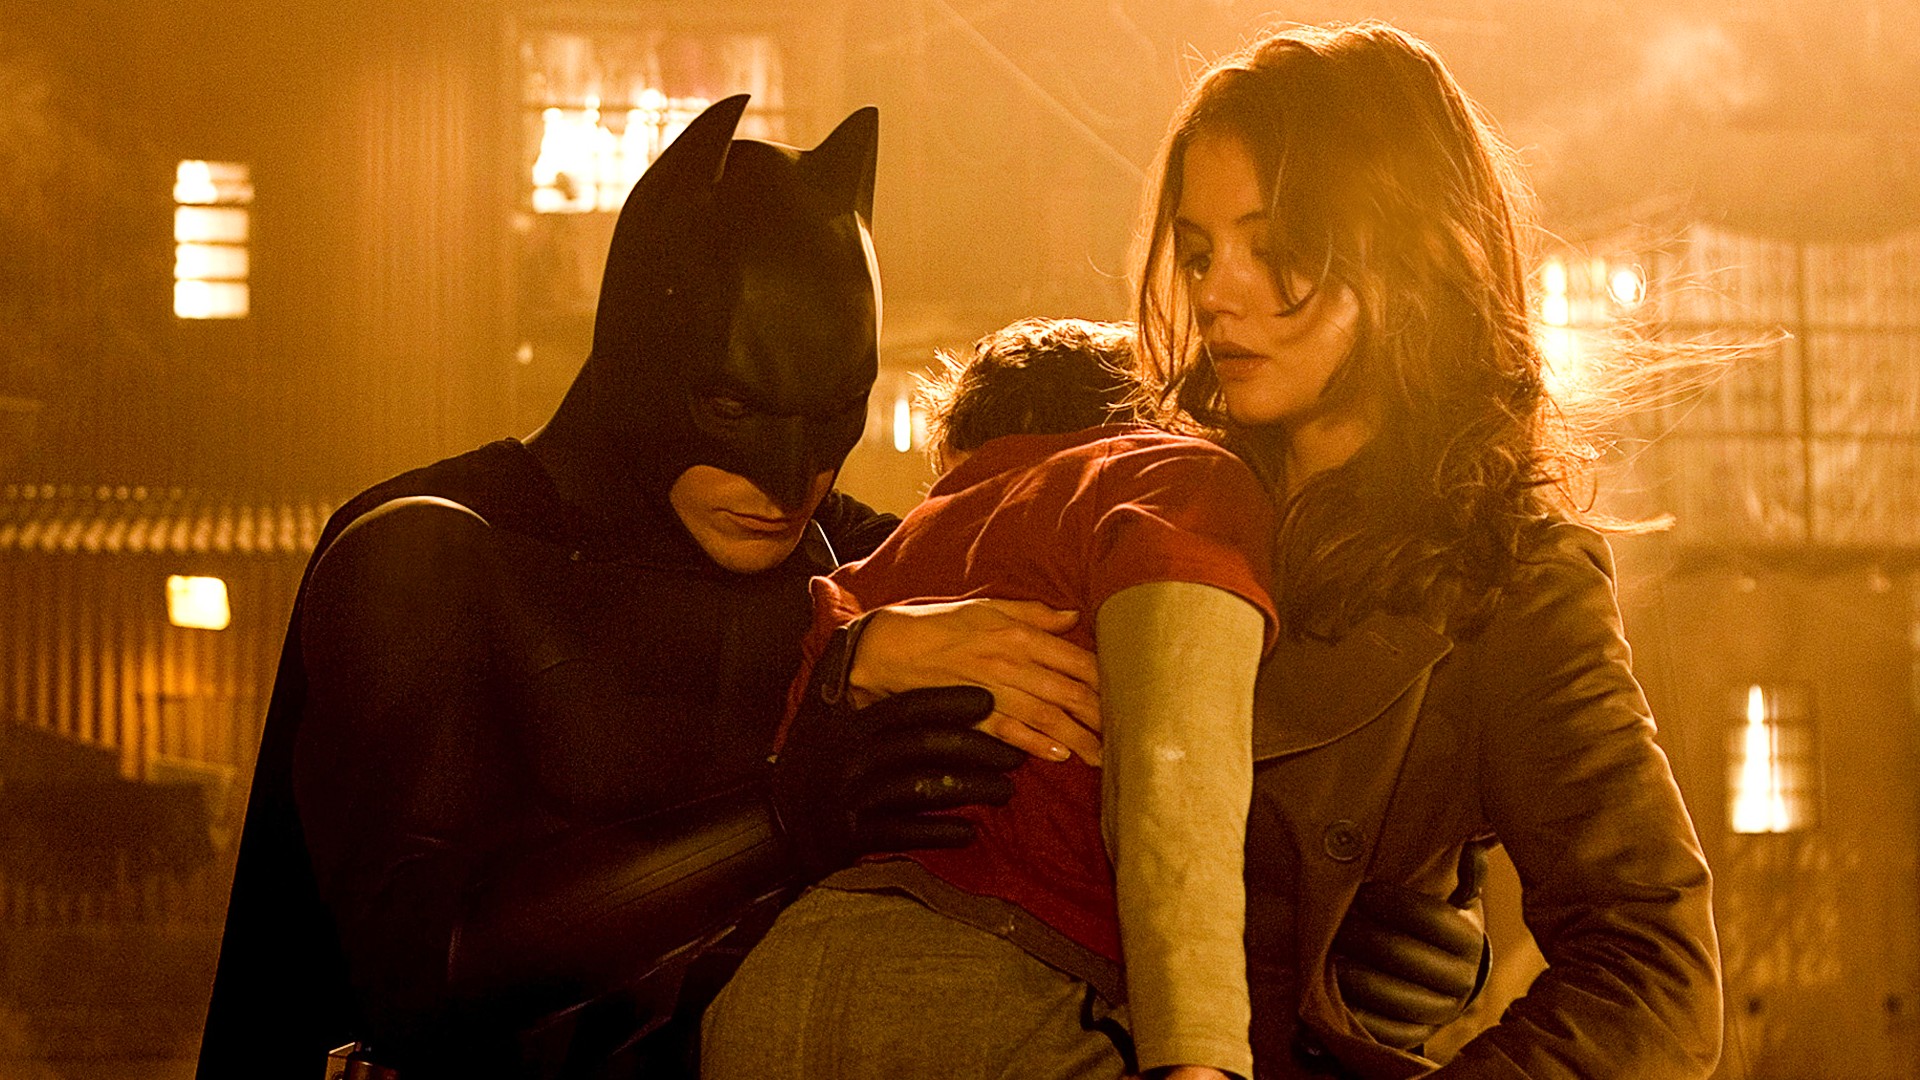 The Real Reason Katie Holmes Ditched Nolan's Batman For A Lower Budget Film